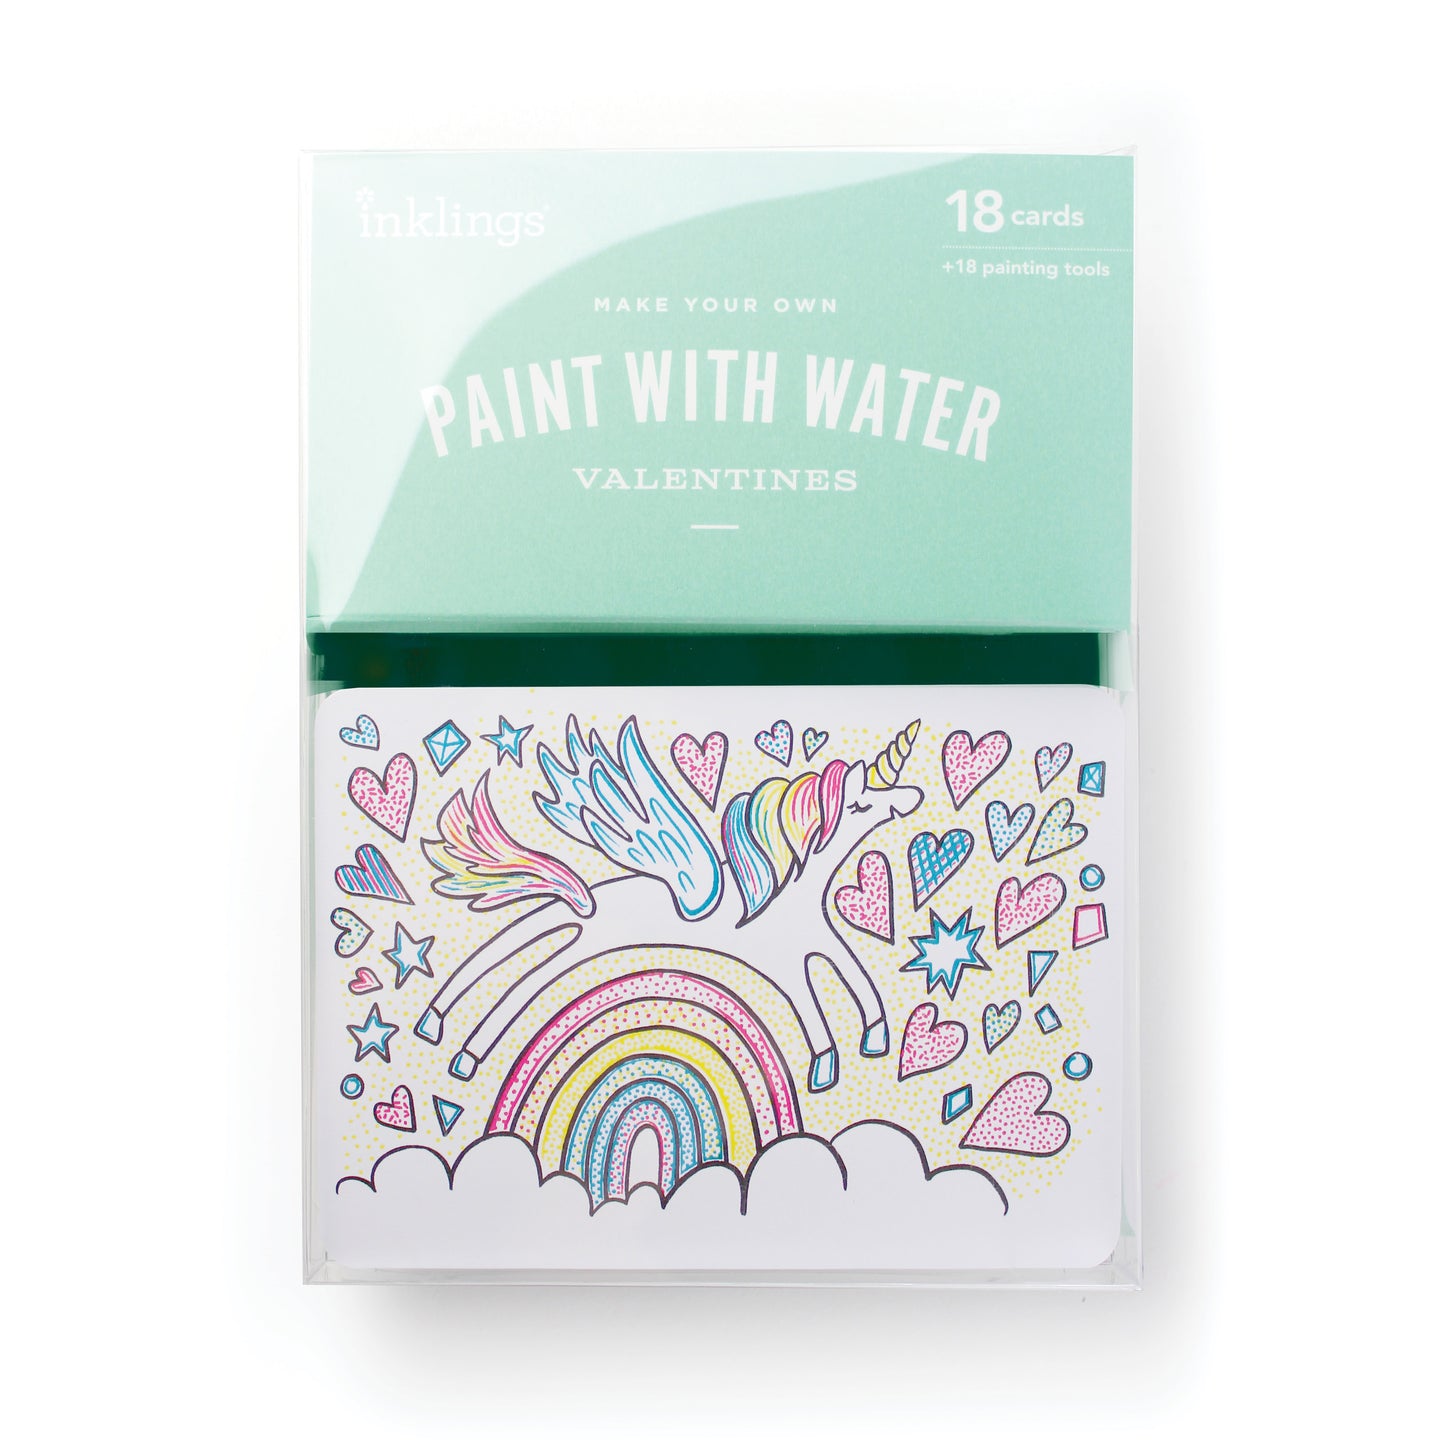 package of paint with water valentines card by inklings paperie